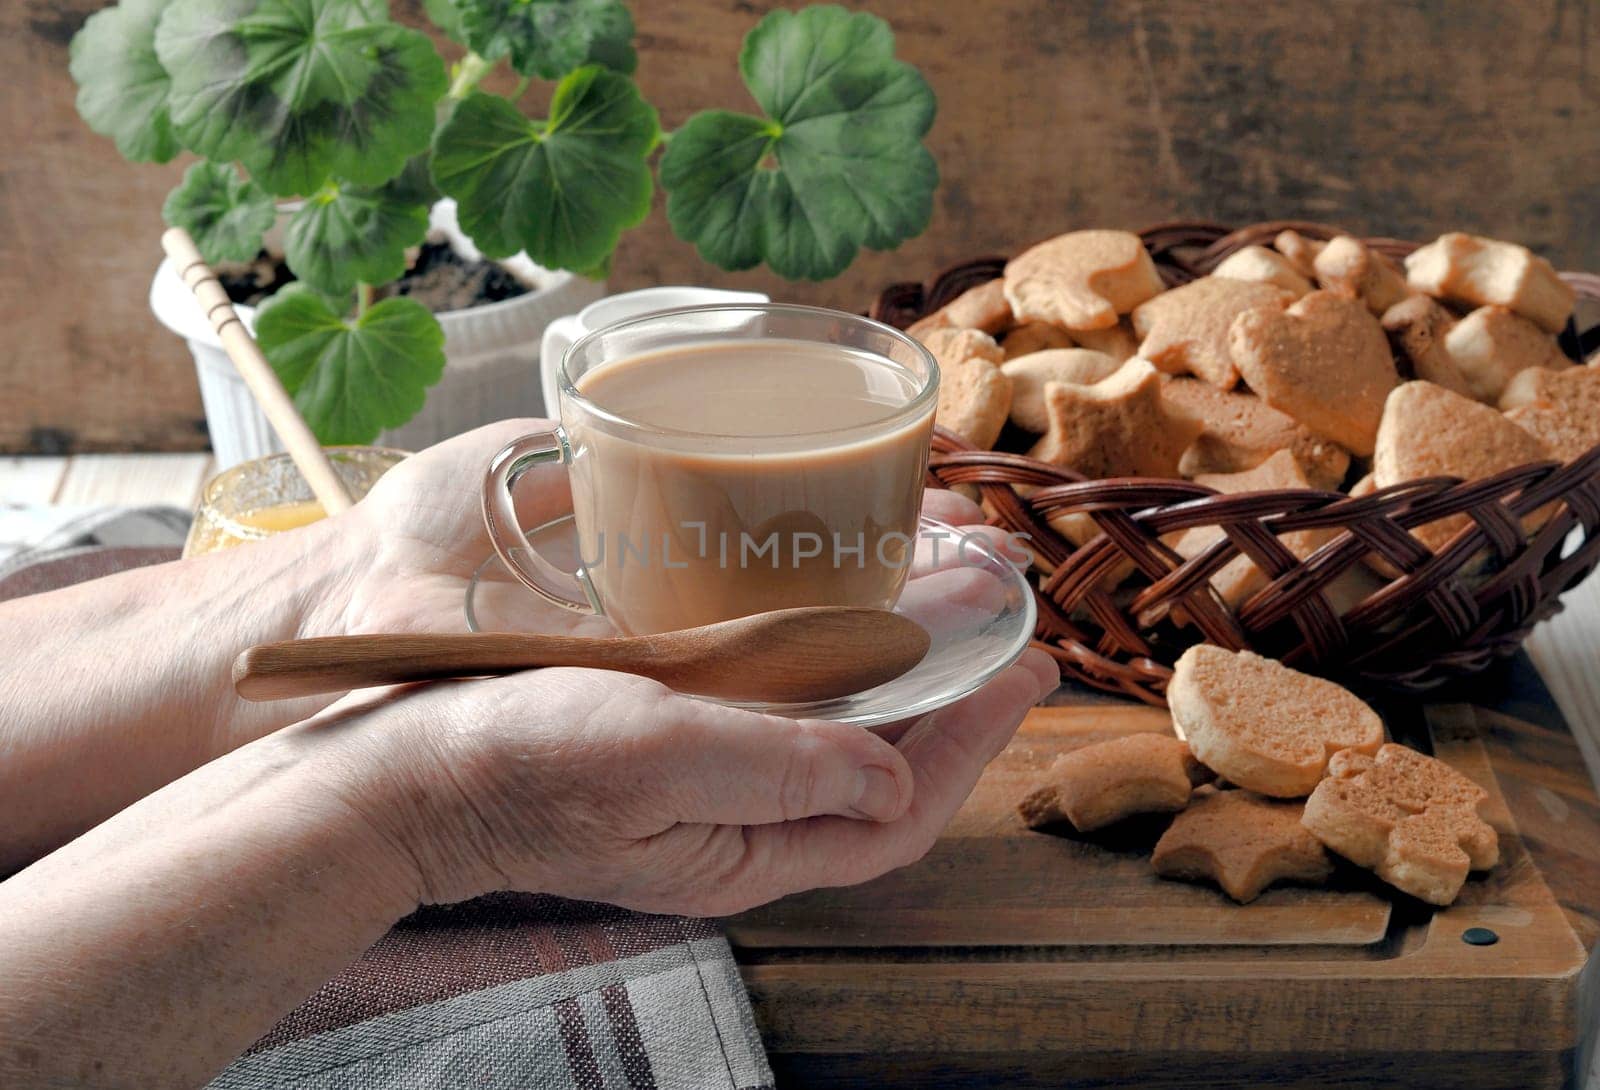 Food background.Healthy homemade food.Elderly woman's hands serve a cup of tea with milk. Still life on a brown background of a rustic kitchen table with a scattering of homemade cookies and honey.